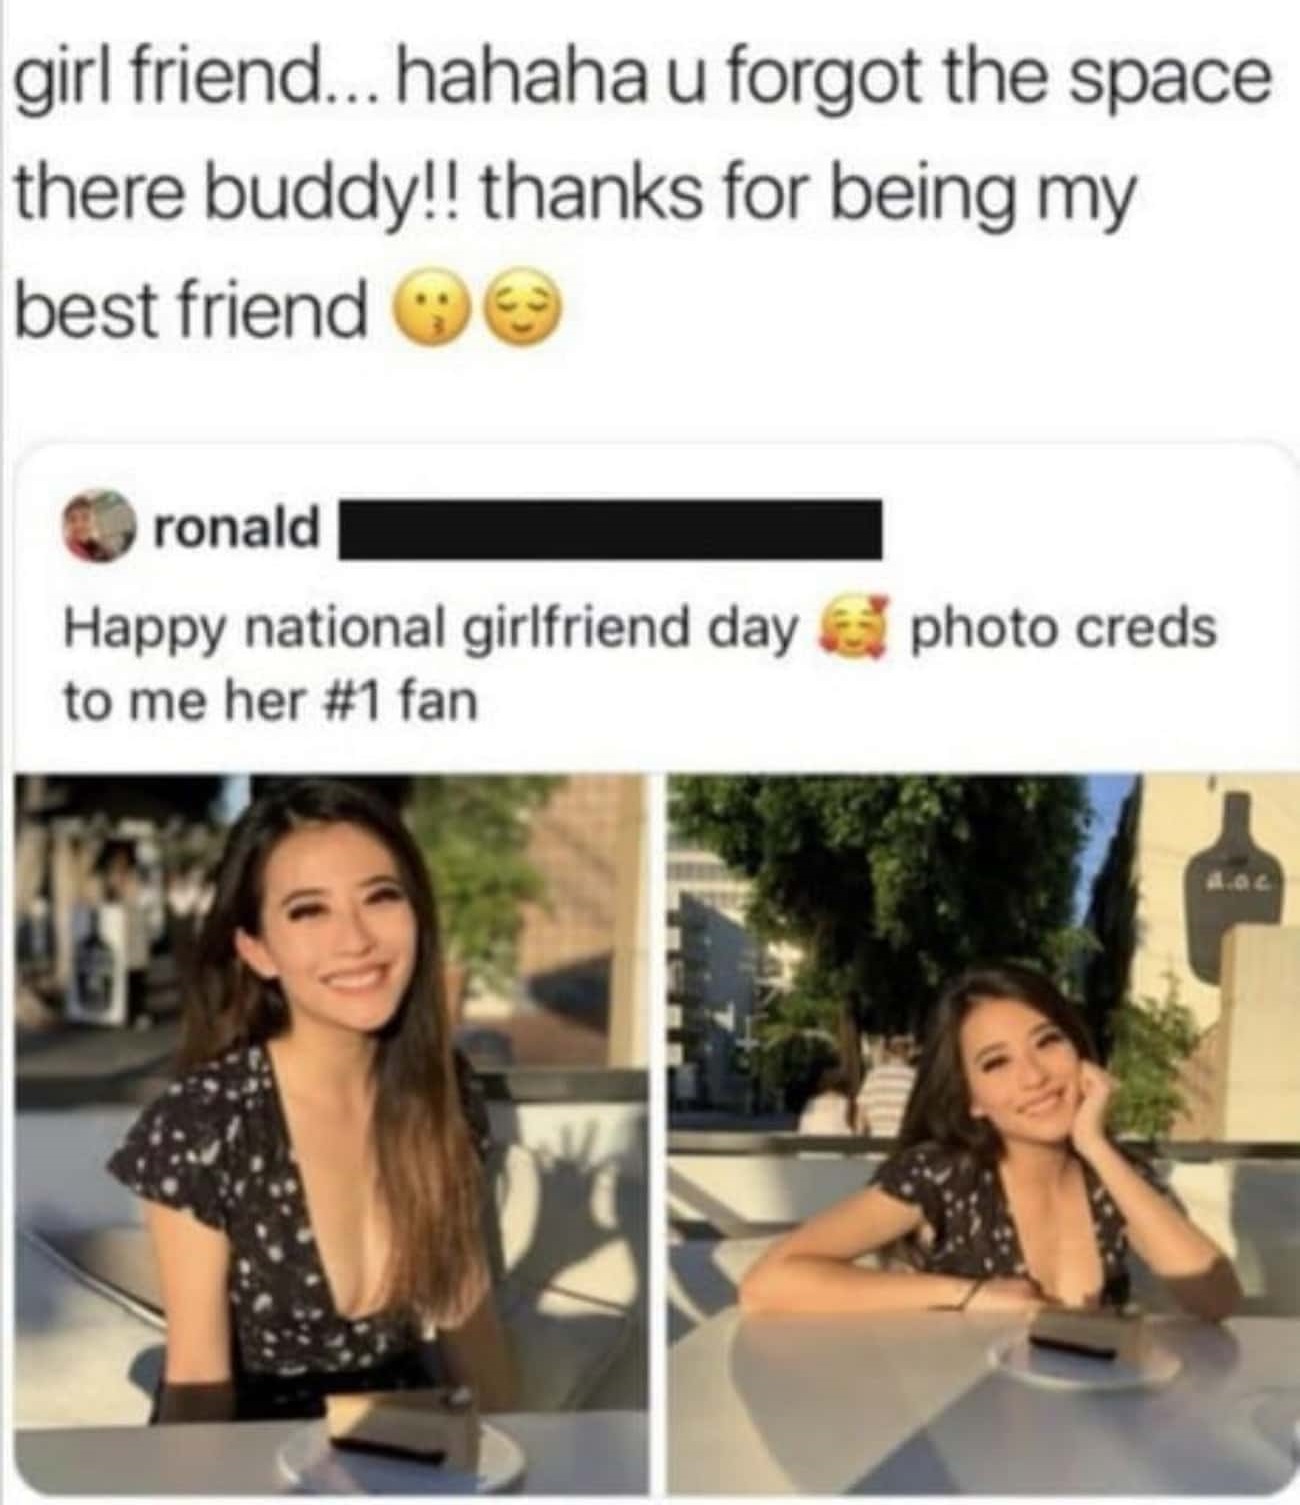 cringe posts - girl friend hahaha u forgot the space there buddy - girl friend... hahaha u forgot the space there buddy!! thanks for being my best friend ronald Happy national girlfriend day photo creds to me her fan 02